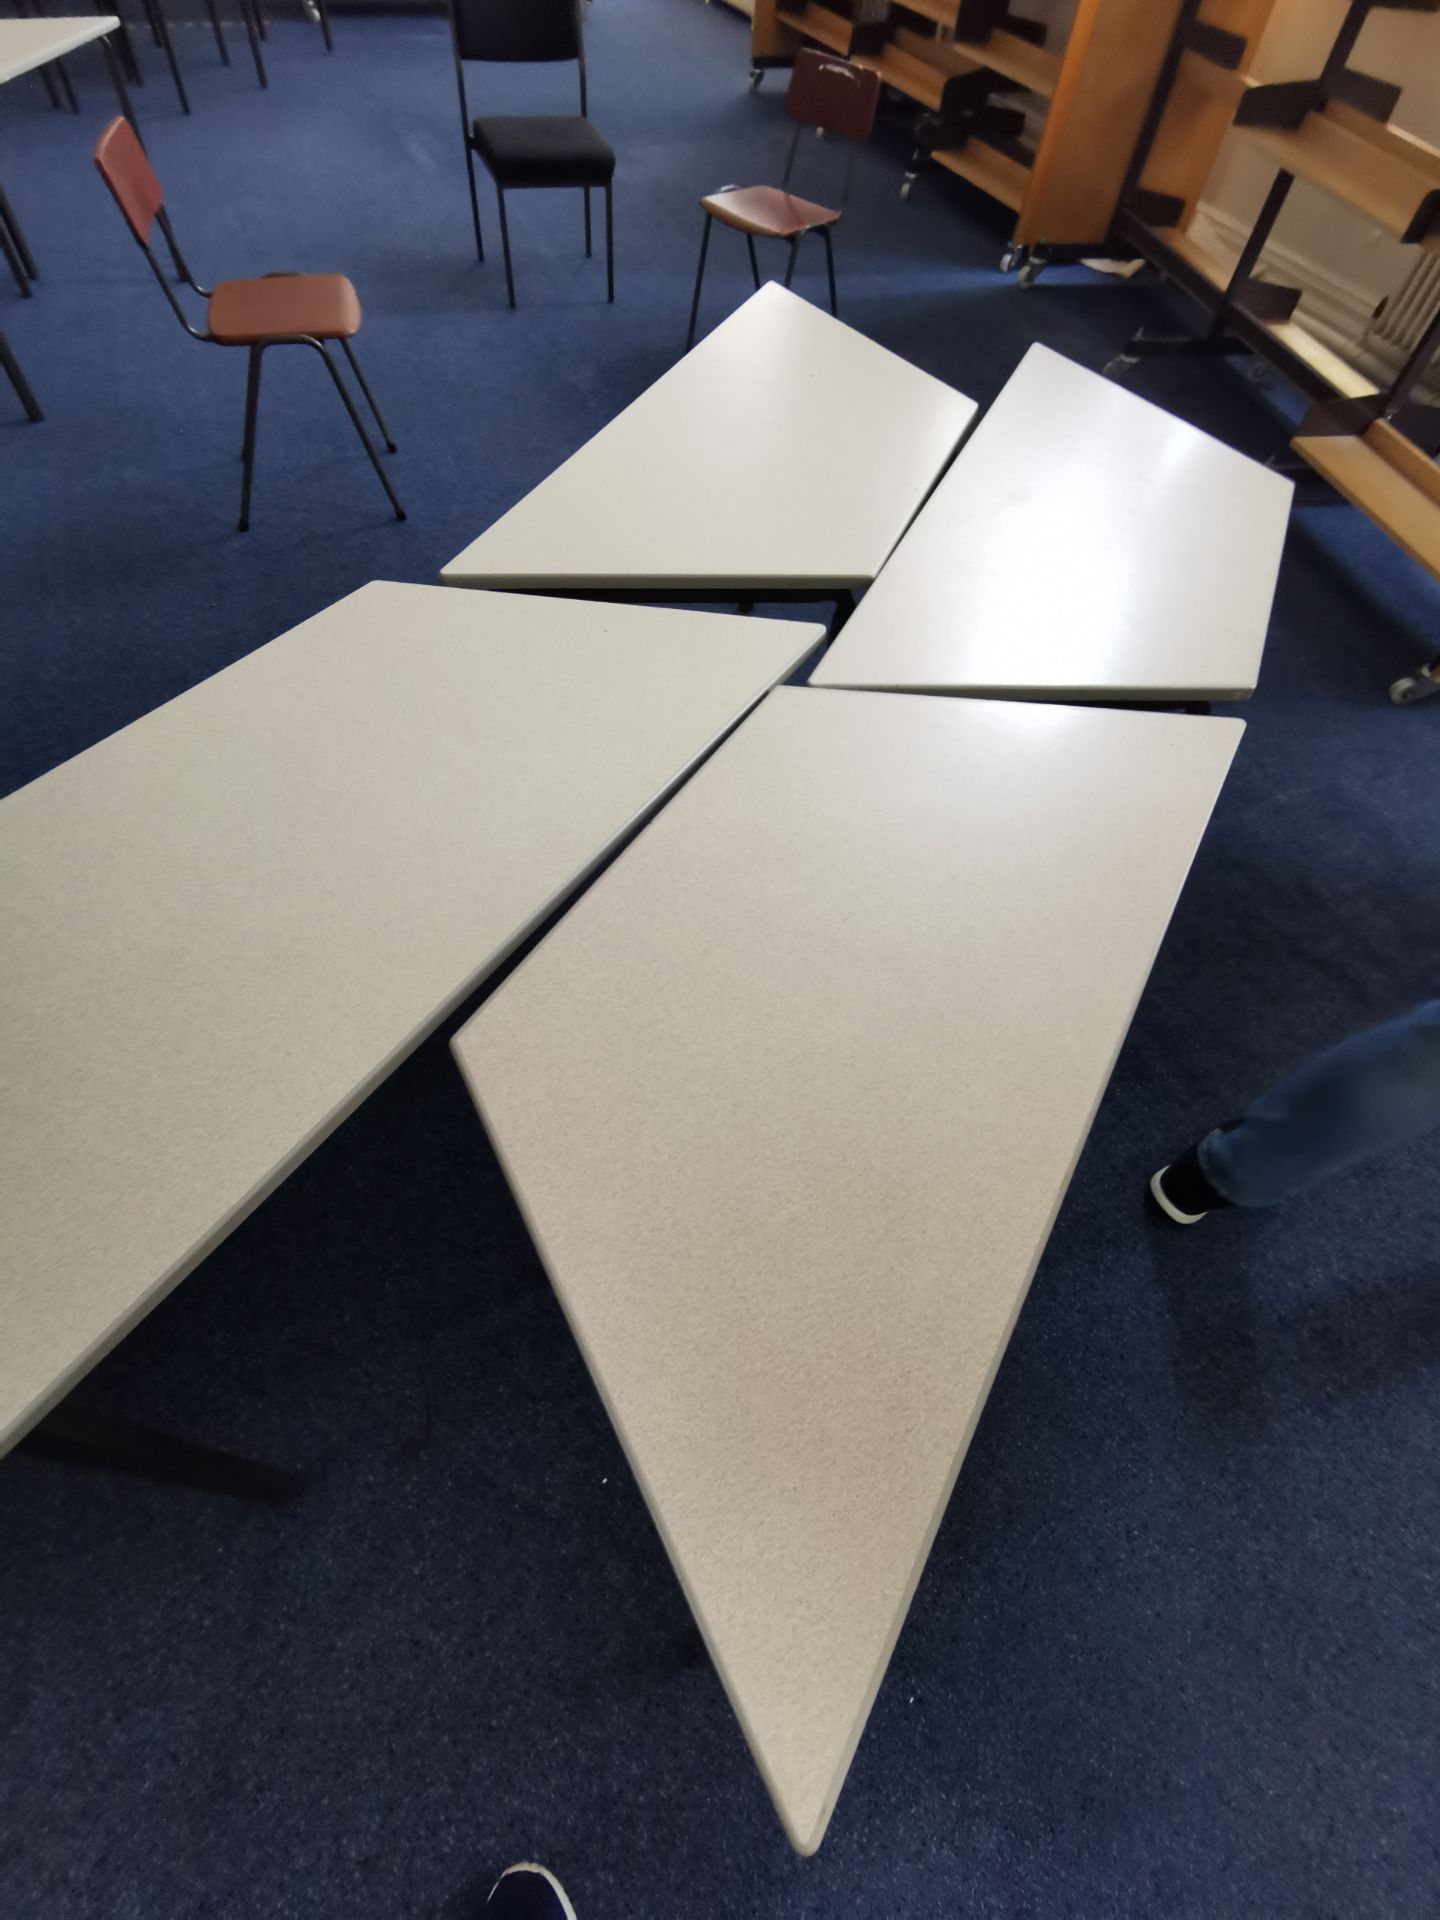 4x trapezoid tables